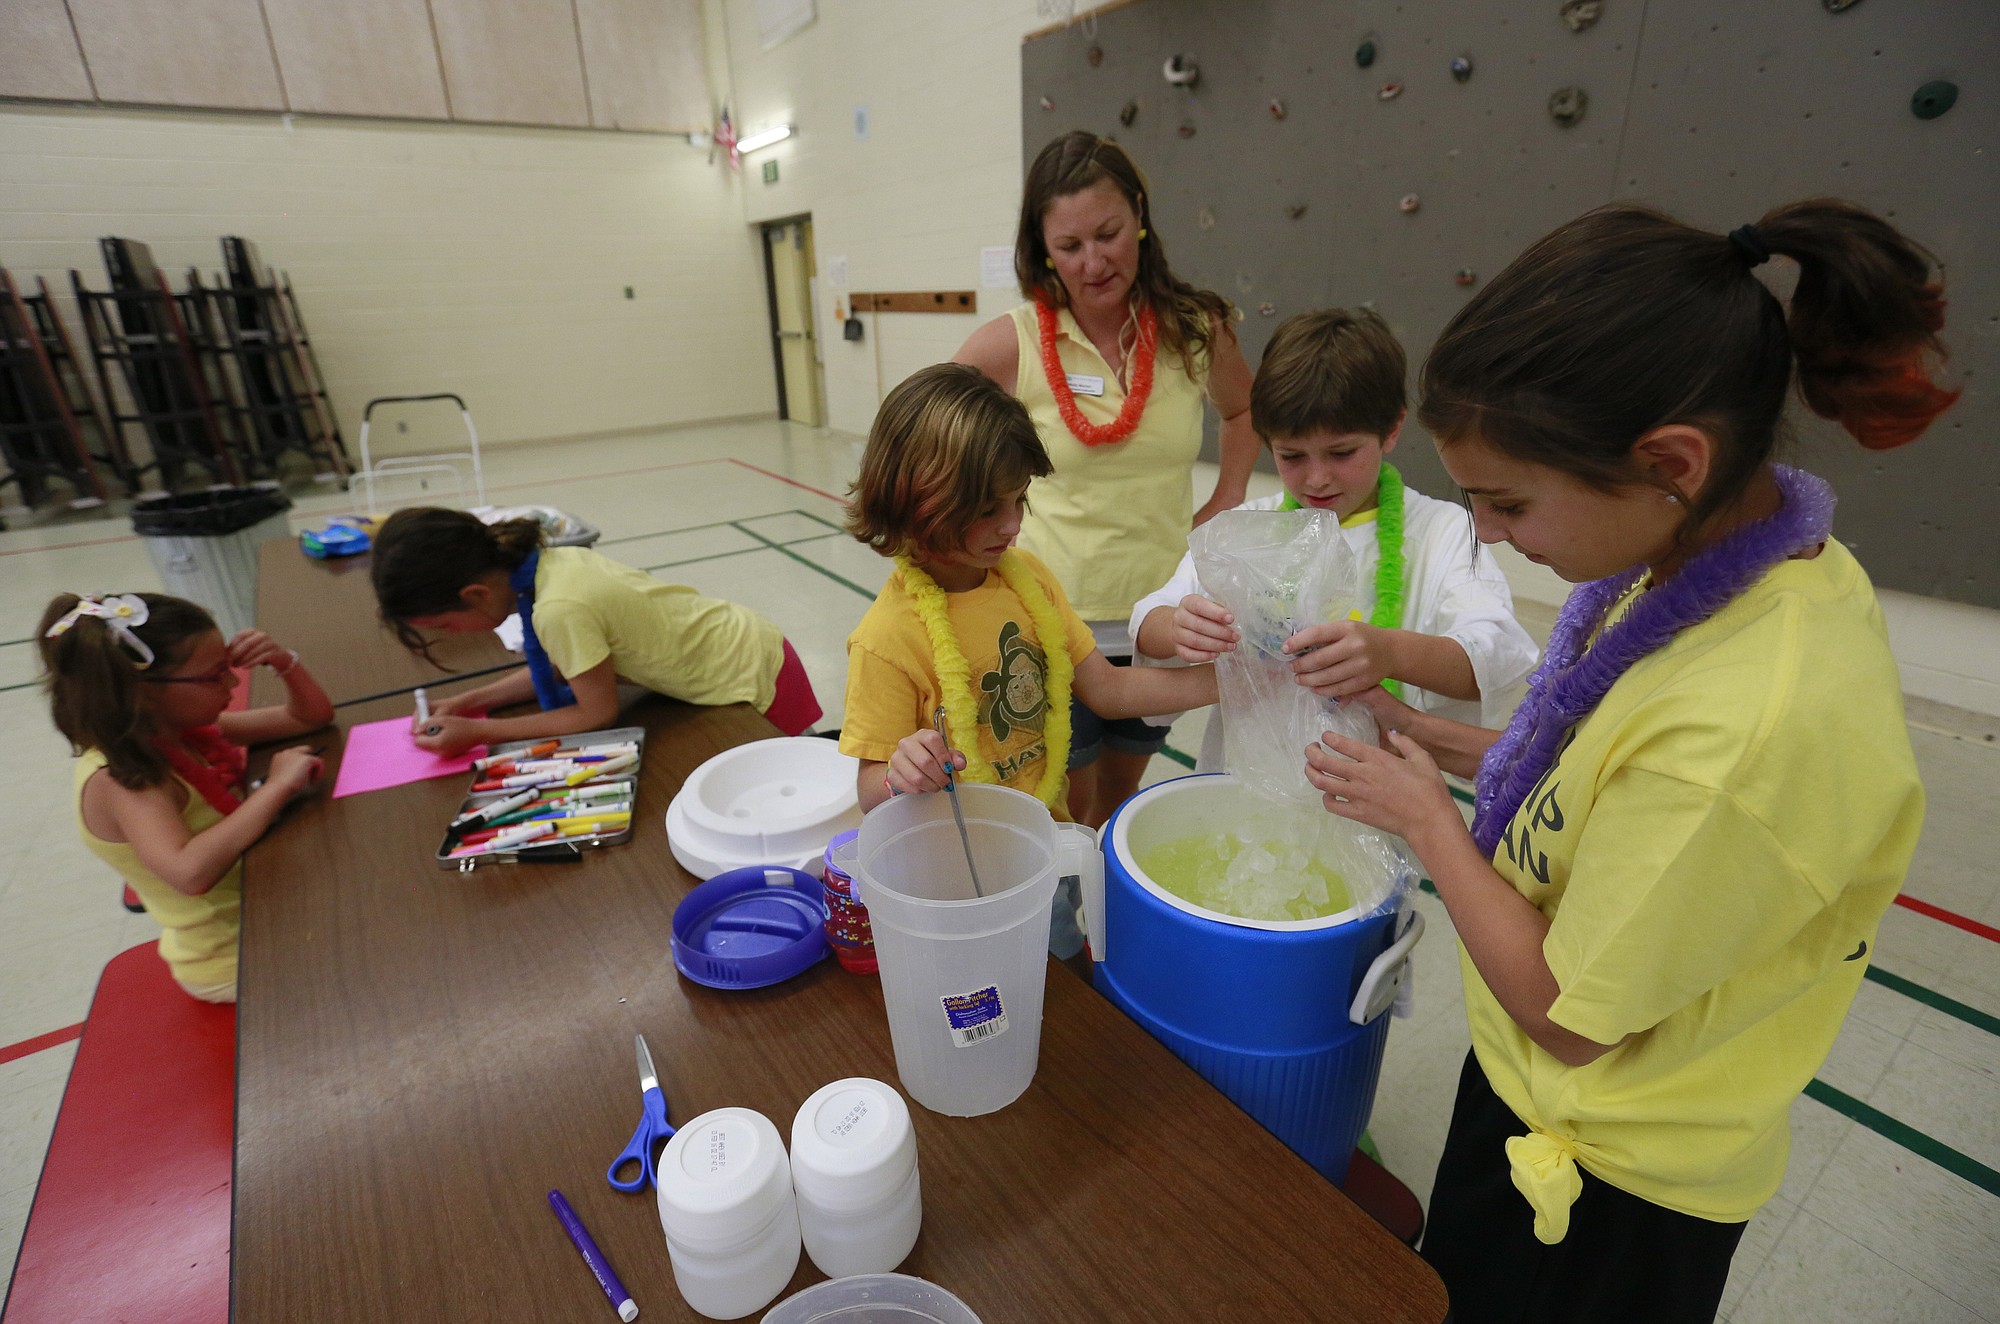 Kids in the Bend Parks and Recreation Department's &quot;Summer Lemonade Stand camp&quot; prepare lemonade for sale at Cascade Middle School in Bend, Ore.